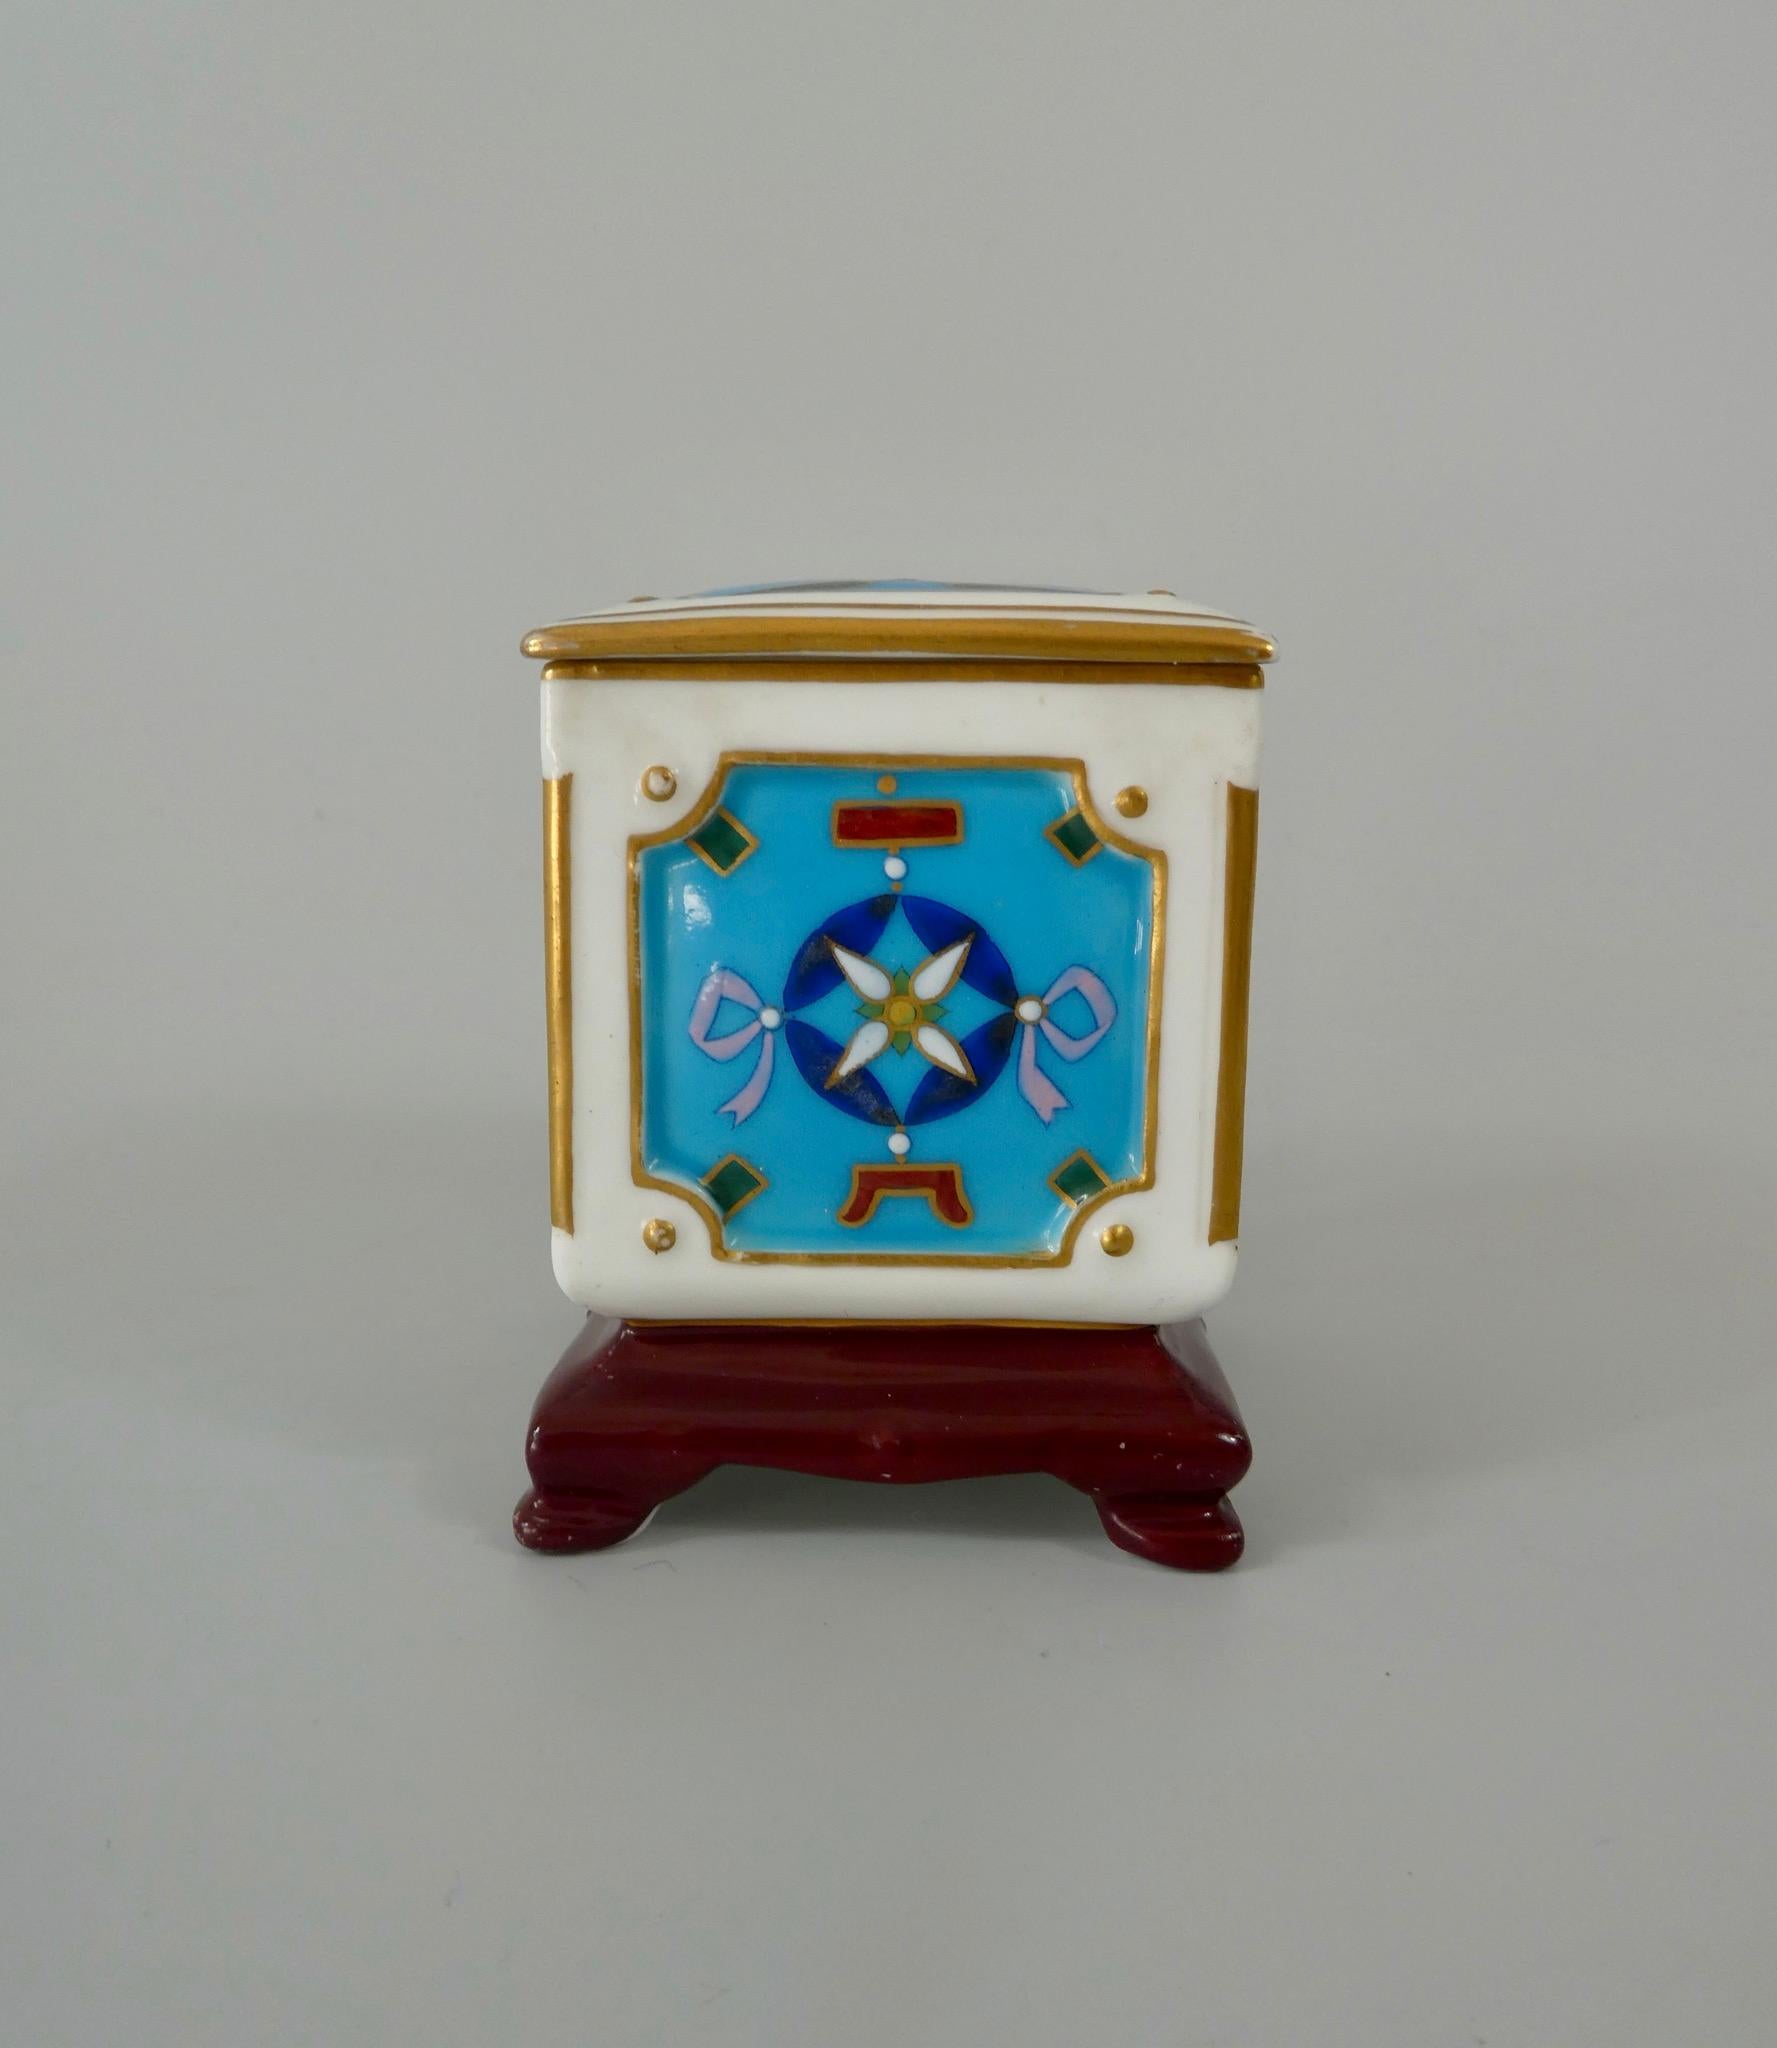 Minton porcelain box and cover, designed by Dr Christopher dresser, circa 1870. The moulded box, set upon an integral stand, decorated in Chinese cloisonne taste, with stylised floral motif, upon a turquoise ground, heightened in gilt. The cover